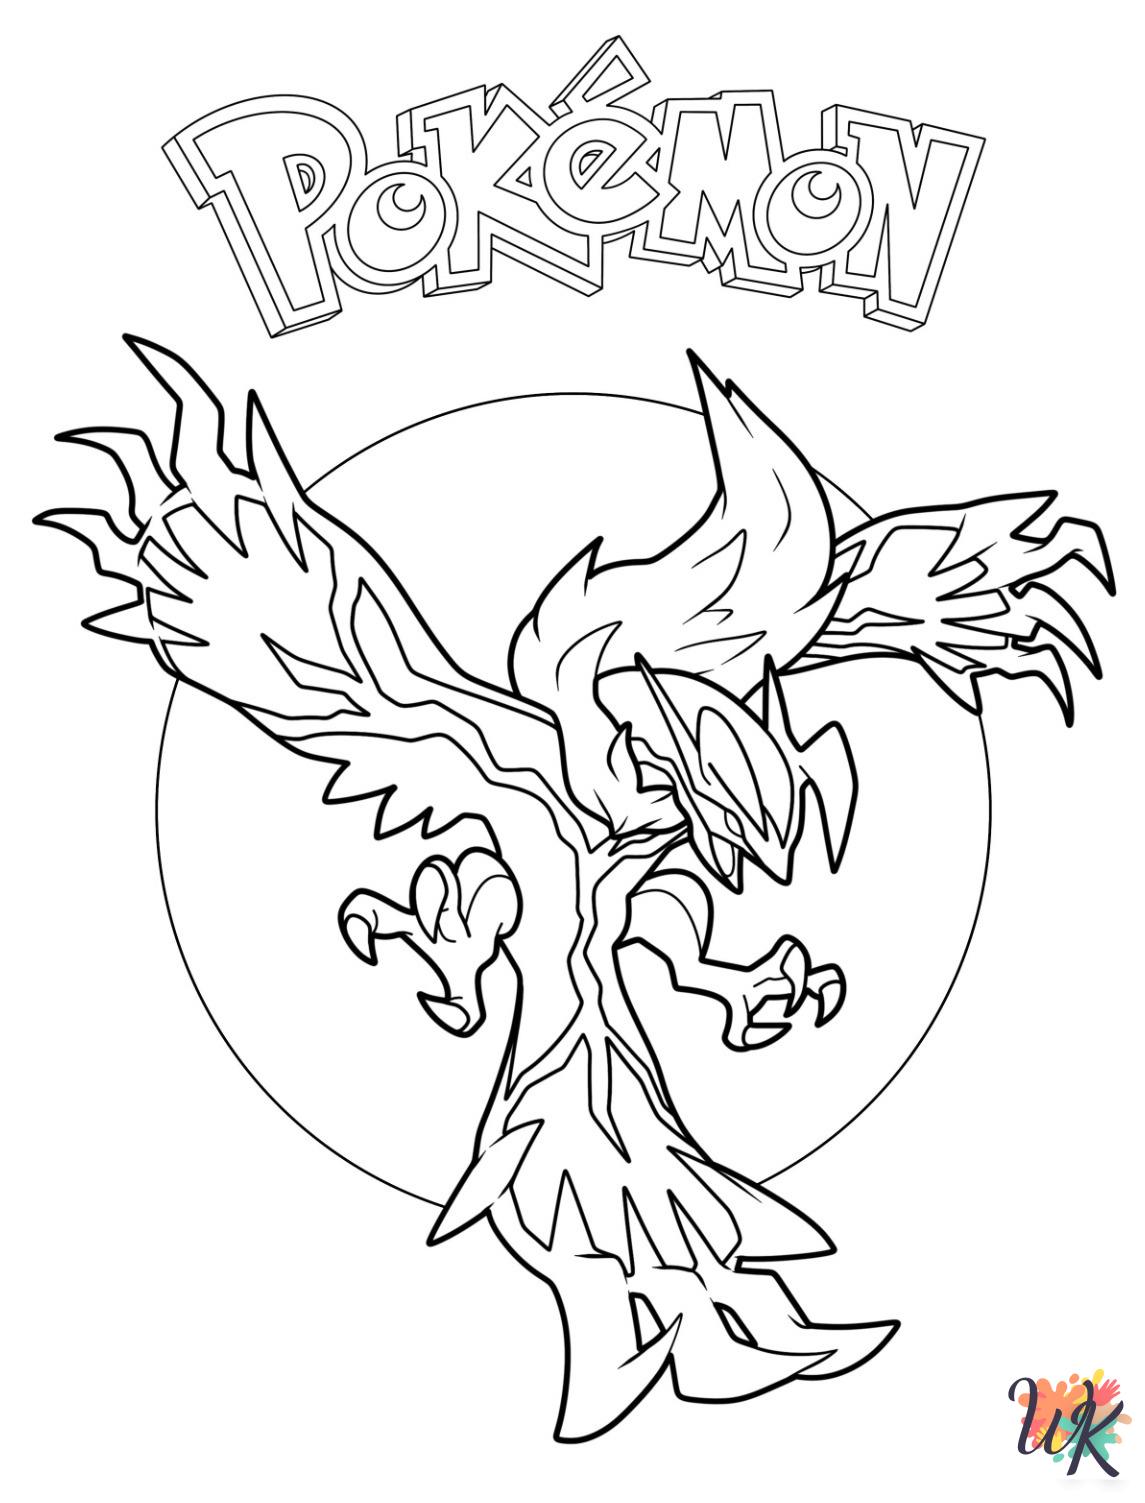 Legendary Pokemon decorations coloring pages